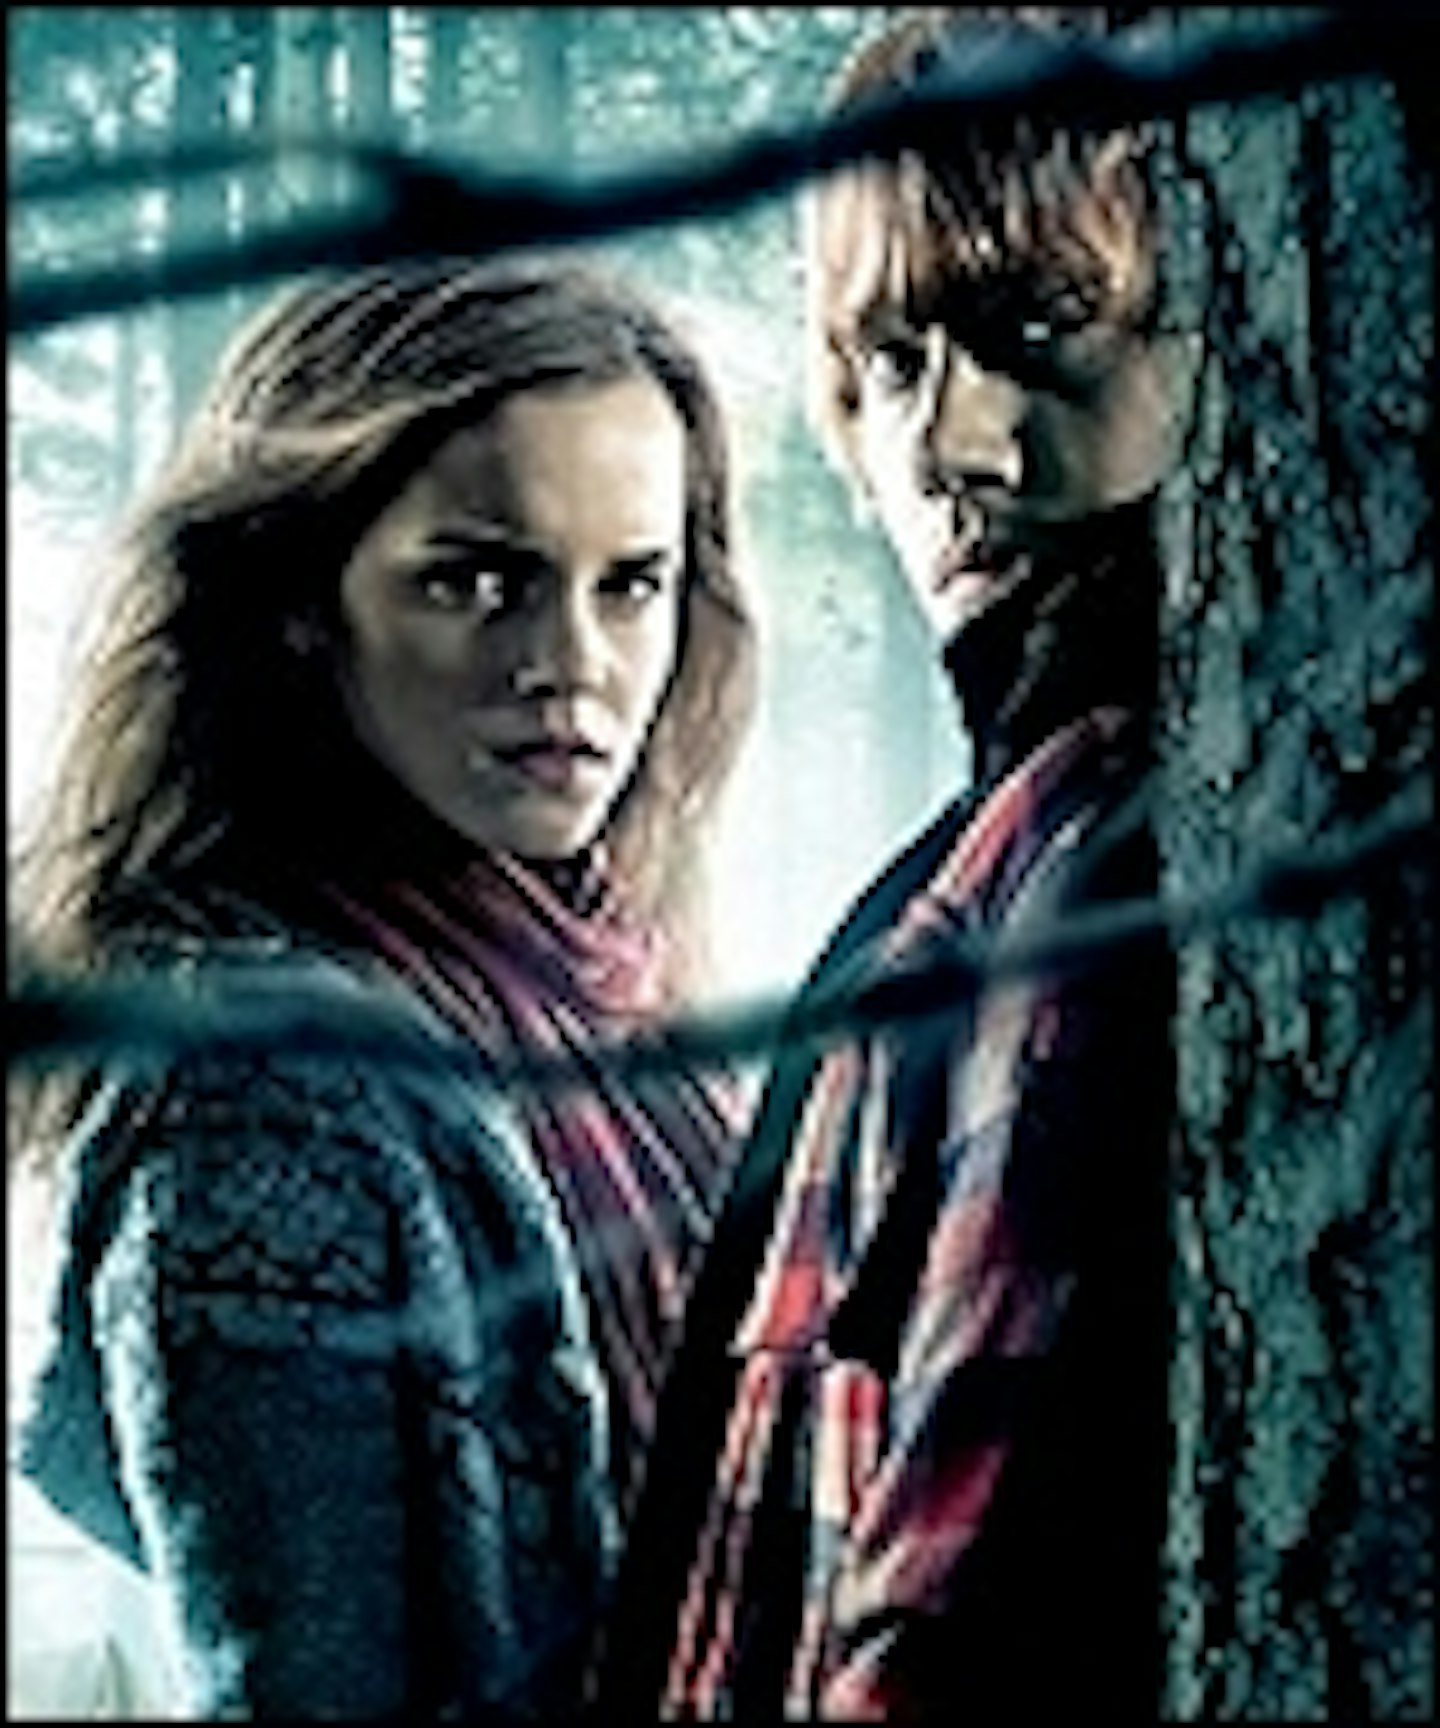 More Potter Posters Hit The Web